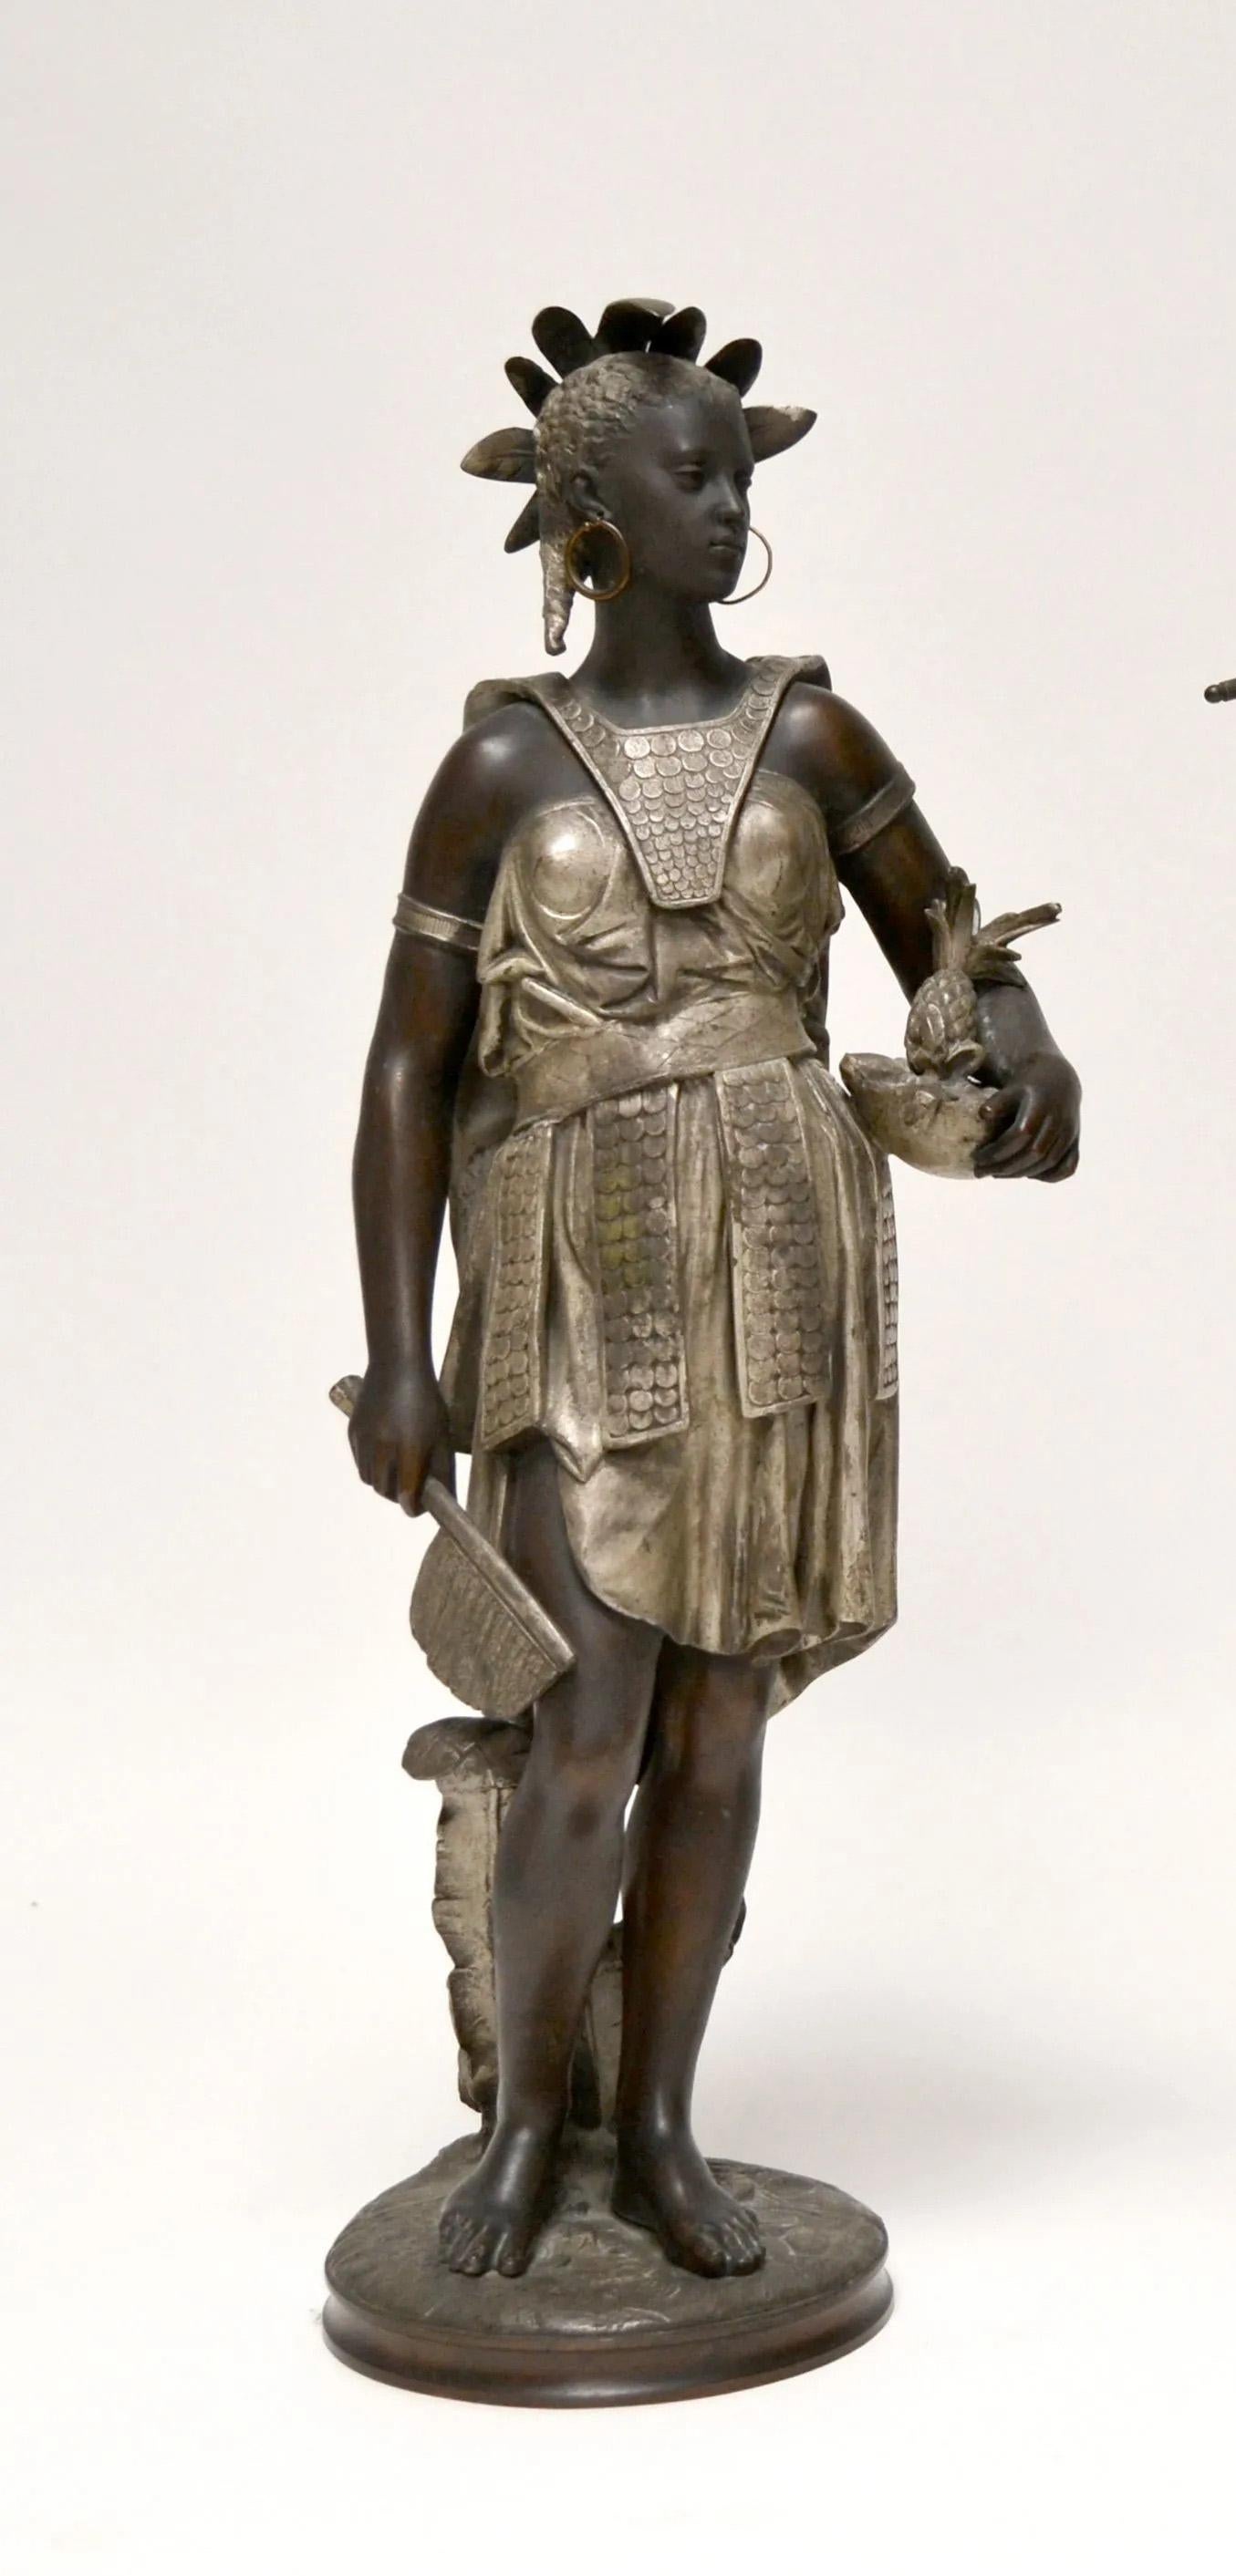 Jean Jules B. SALMSON (1823-1902) couple of Native American; Spelter with black and silver patina, signed. (The man's earrings and shield are missing, some wear, small accident to a feather). Measure: H 53 and 54 cm.